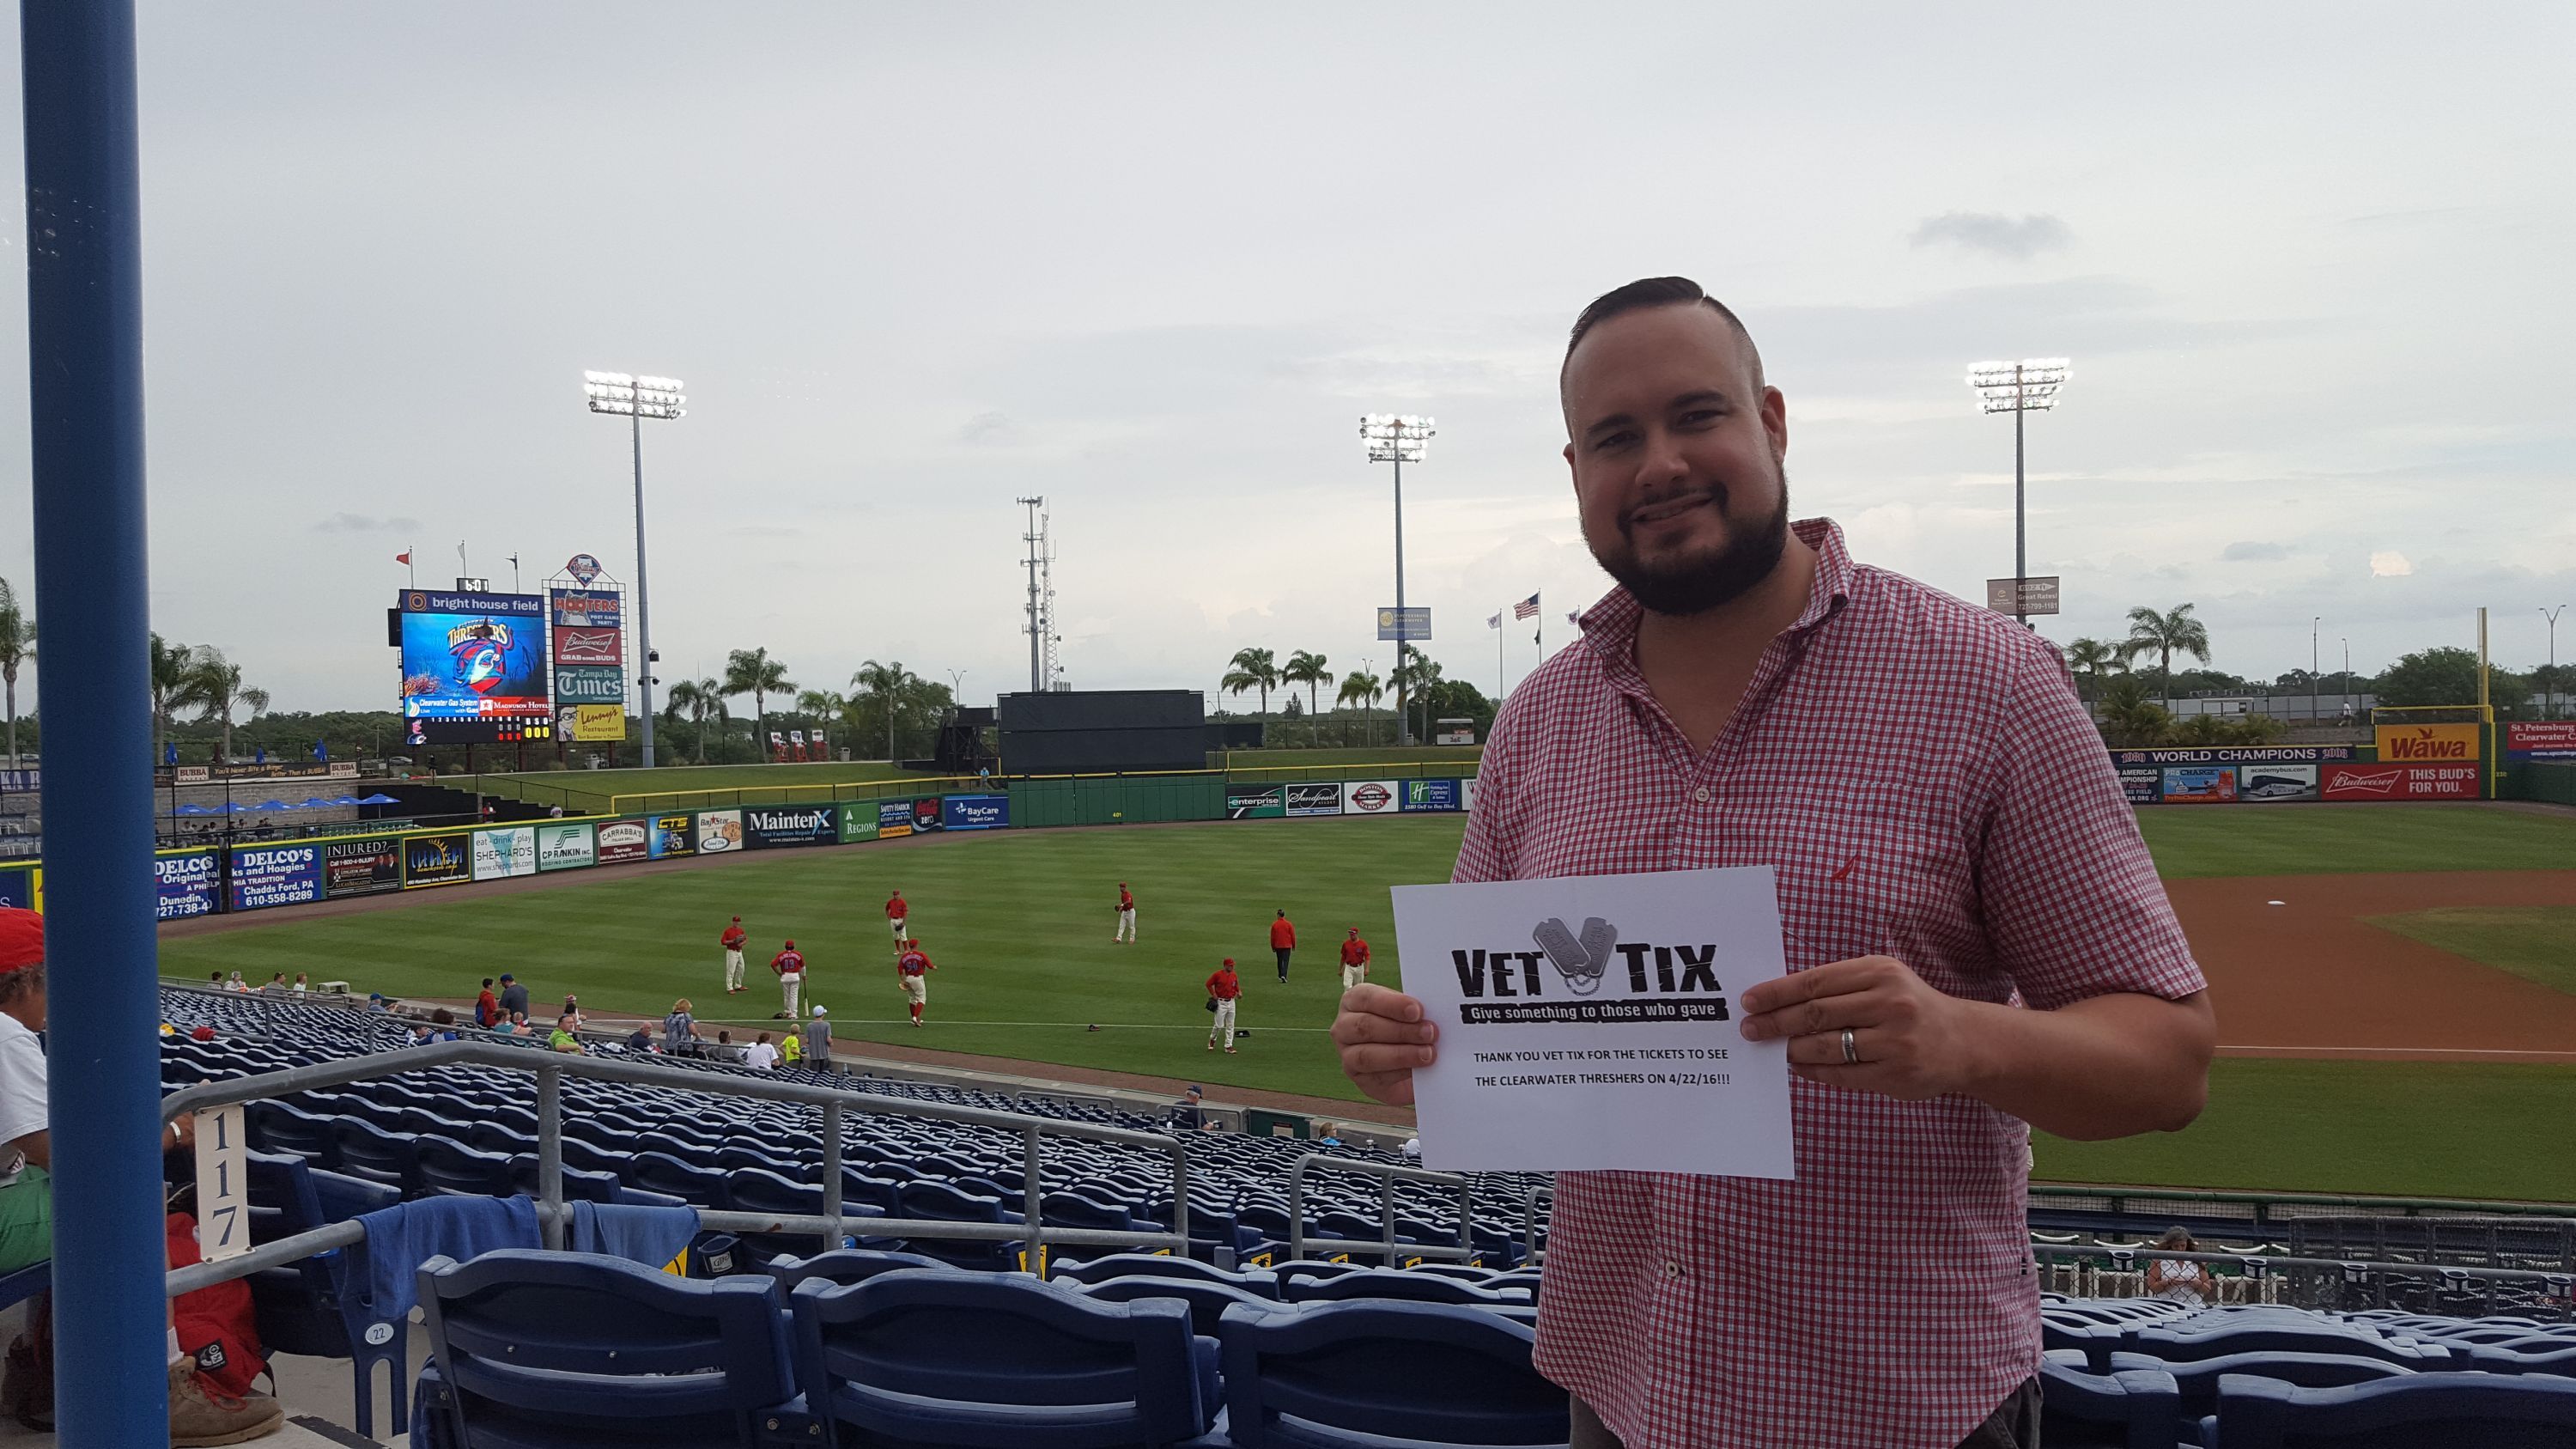 Buy Clearwater Threshers Tickets, Prices, Game Dates & MiLB